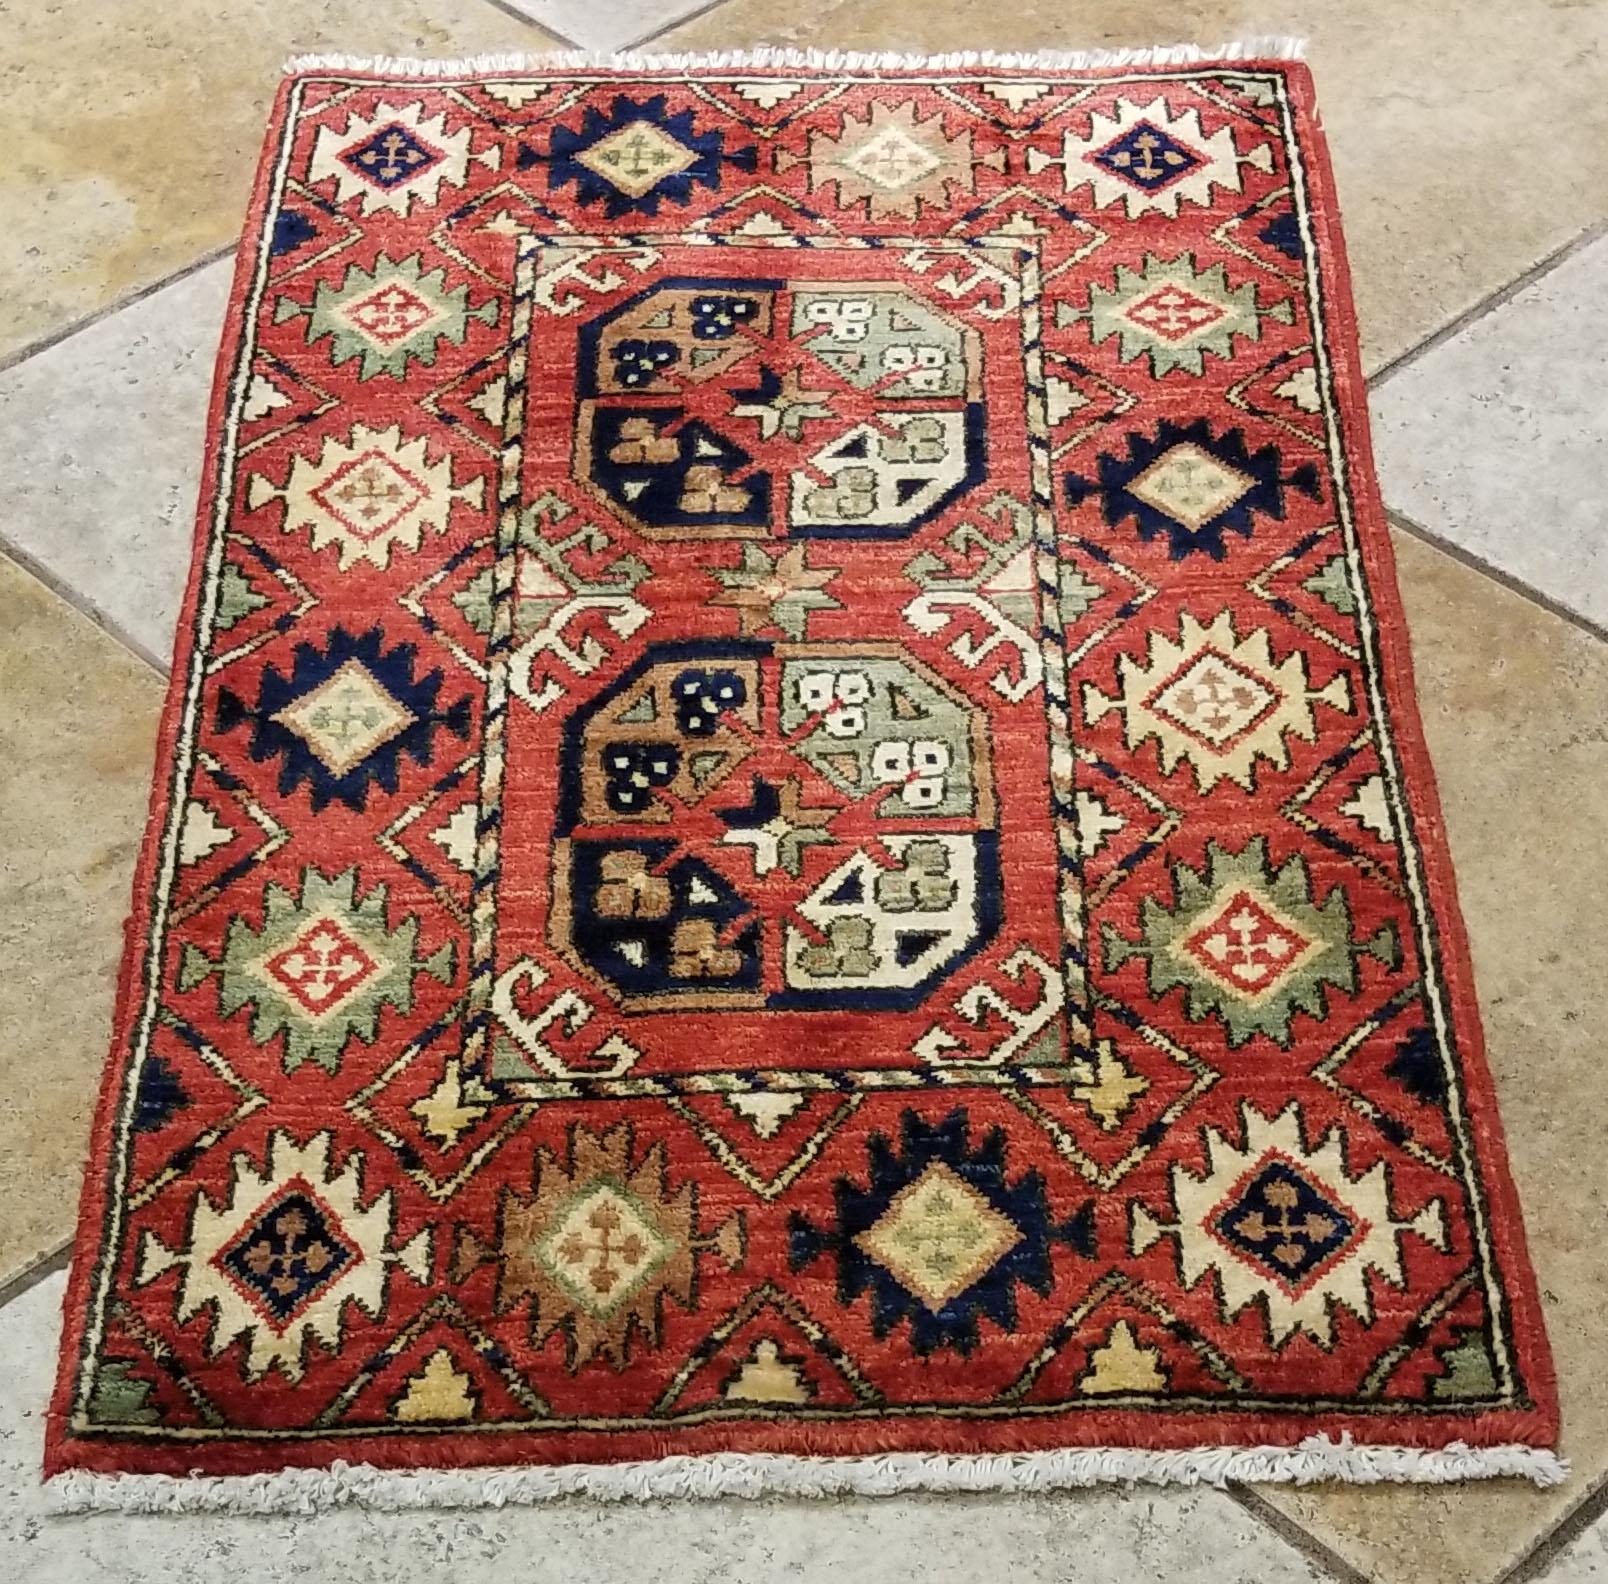 We carry some of the best Afghan bedside rugs, and if you are willing to give your bedroom a colorful new looks with one of our stunning carpets, we are here to help. This one measures approximately 38